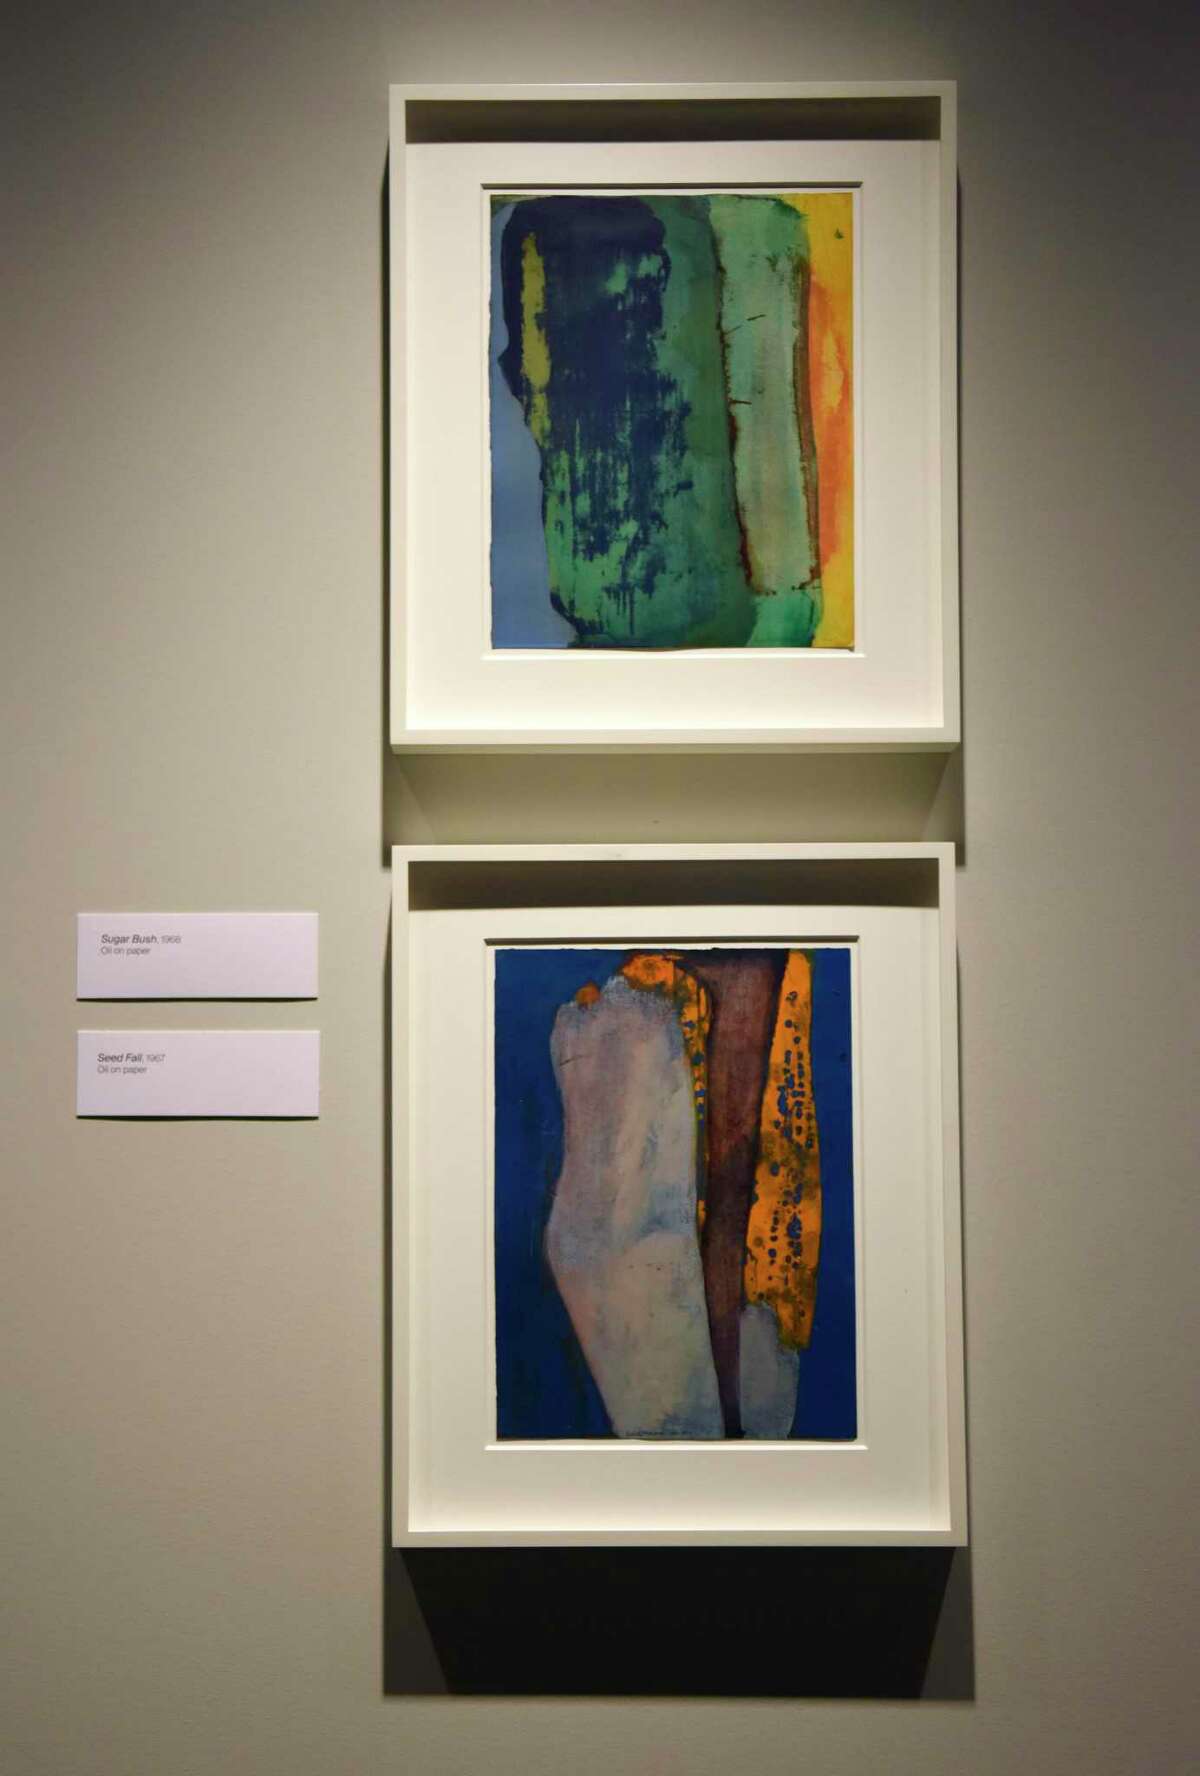 Emily Mason's 1968 painting "Sugar Bush," top, and 1967 painting "Seed Fall," bottom, are displayed at the new exhibition "She Sweeps with Many-Colored Brooms” featuring paintings and prints by Emily Mason at the Bruce Museum in Greenwich, Conn. Thursday, Nov. 19, 2020. Emily Mason (1932-2019) was born into a family of renowned artists stretching back to early American Republic painter John Trumbull as well as her mother, the acclaimed abstract painter Alice Trumbull Mason. Her own artistic path spans a variety of art movements including abstract expressionism and color field painting.